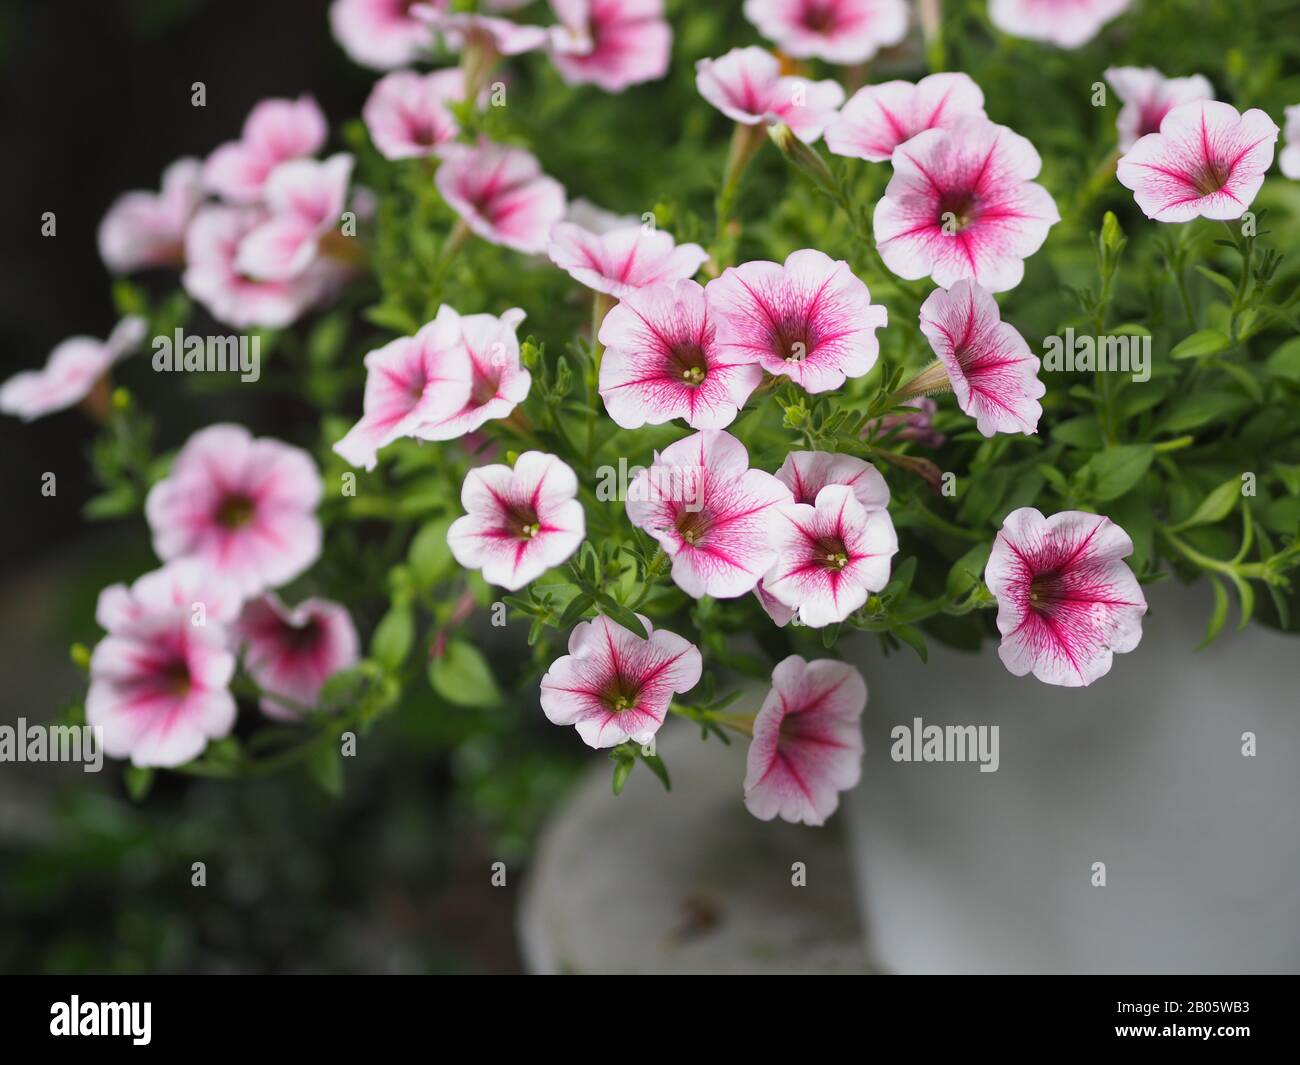 Petunia Easy wave viloet pink color  flower beautiful on blurred of nature background Stock Photo